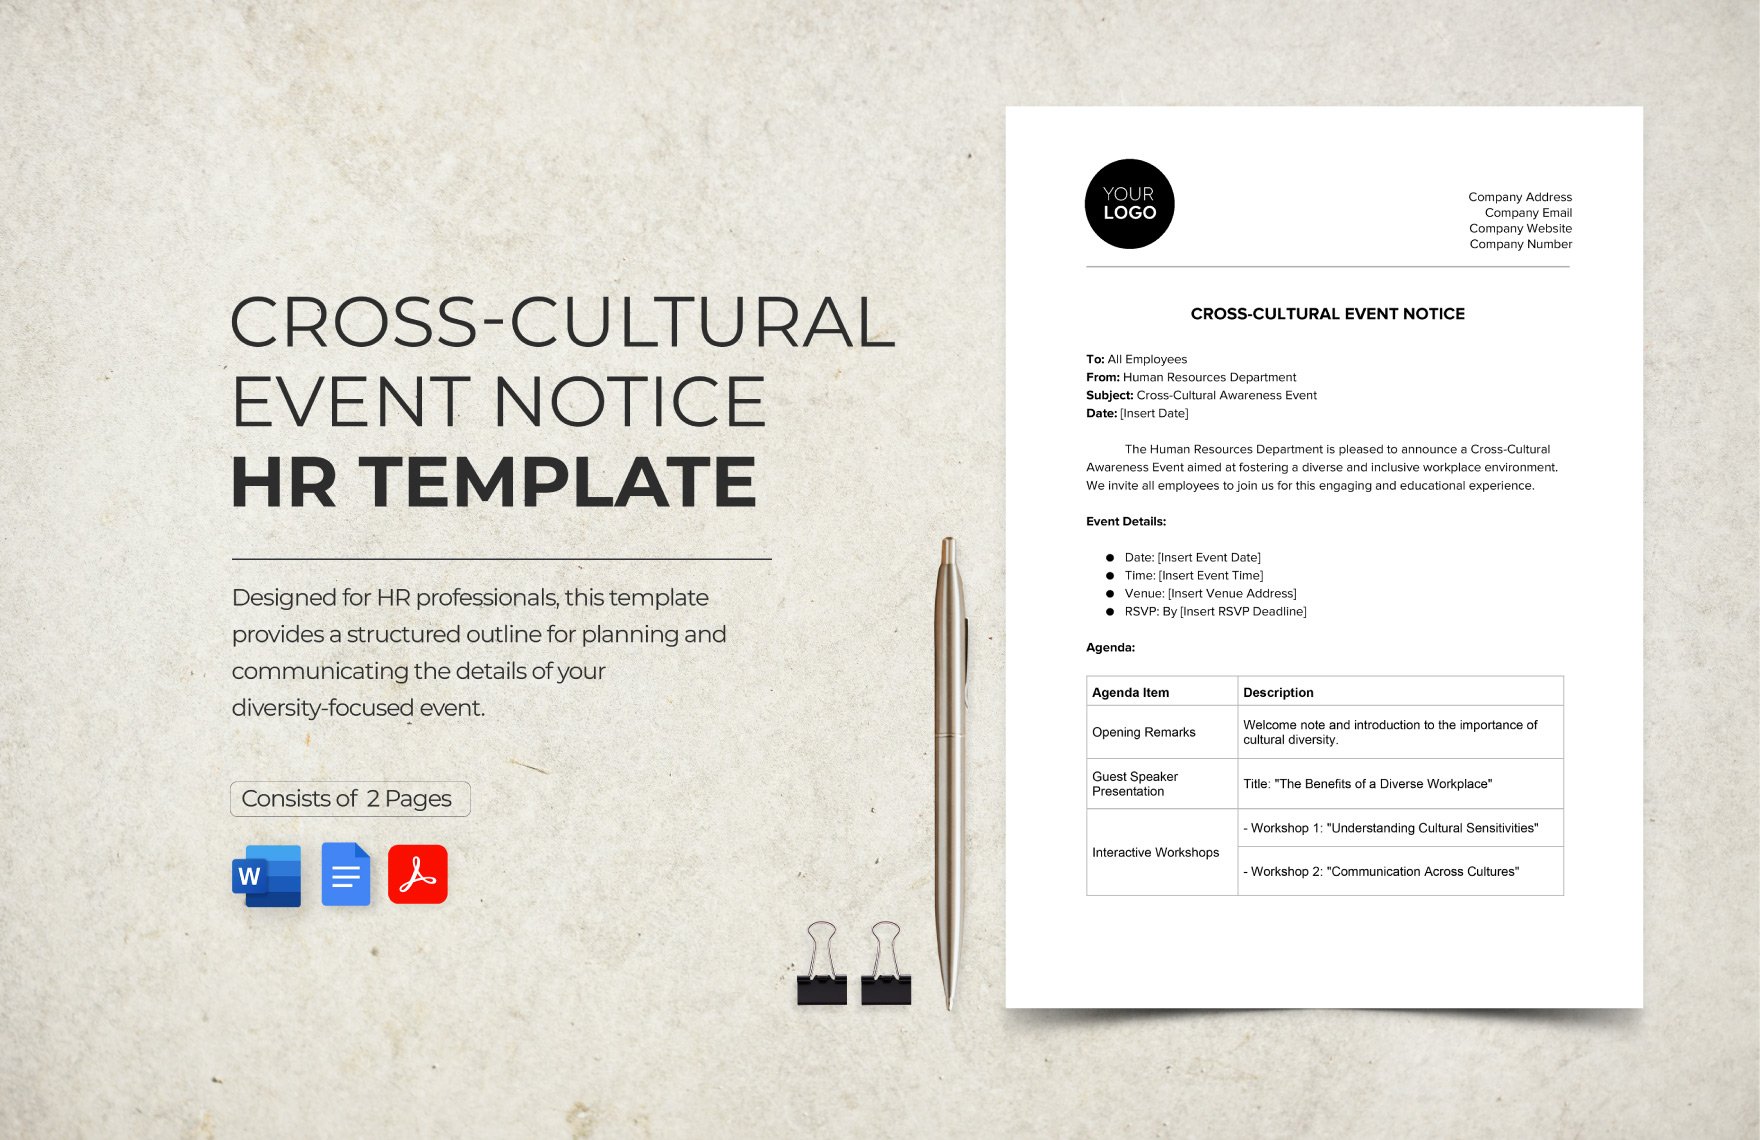 Cross-Cultural Event Notice HR Template in Word, Google Docs, PDF